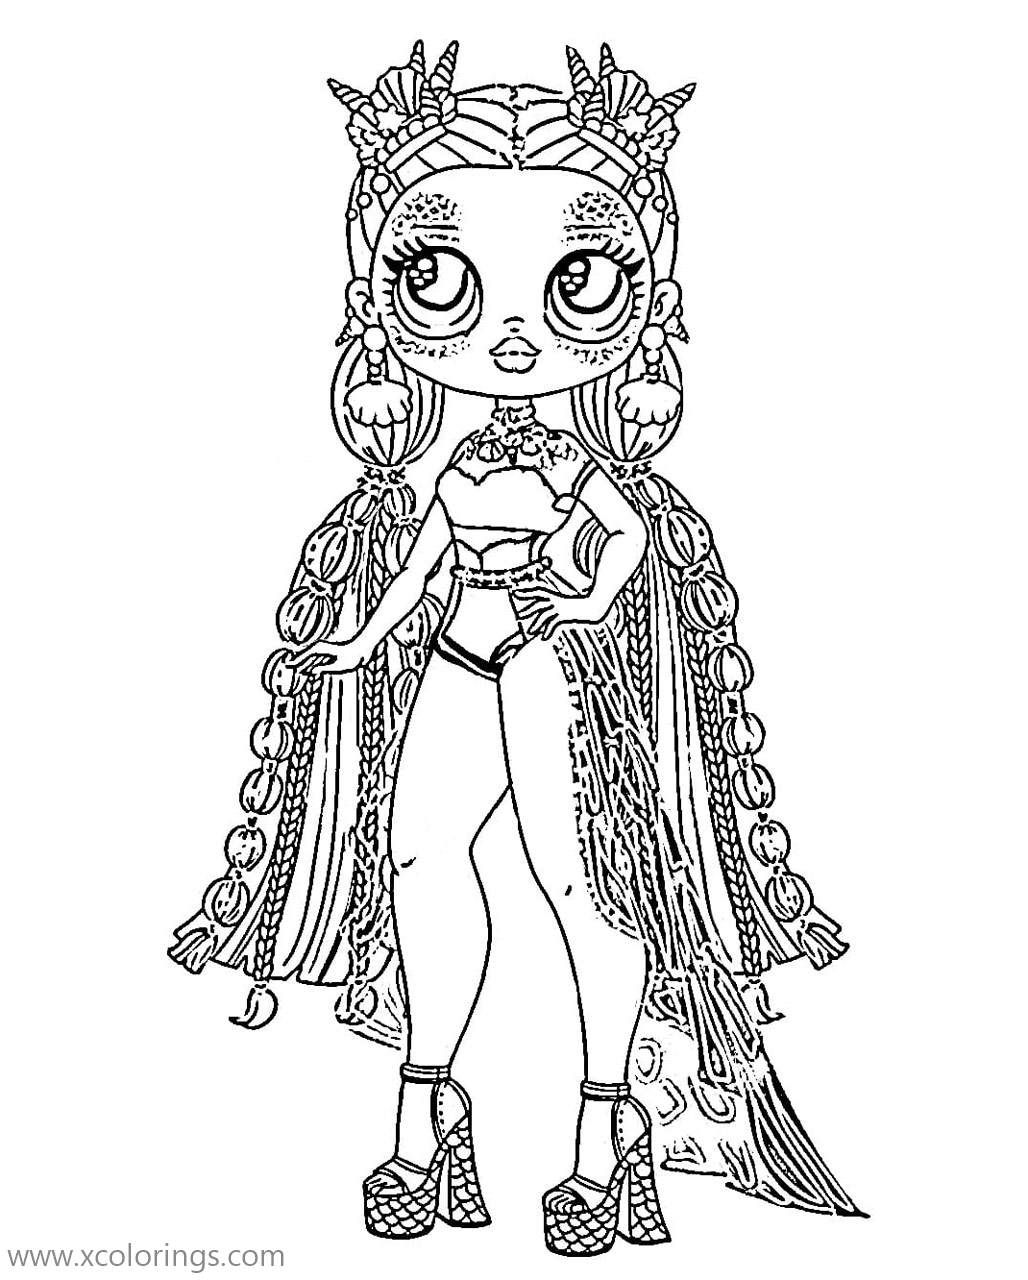 Sea princess from lol omg doll coloring pages princess coloring pages coloring pages free kids coloring pages